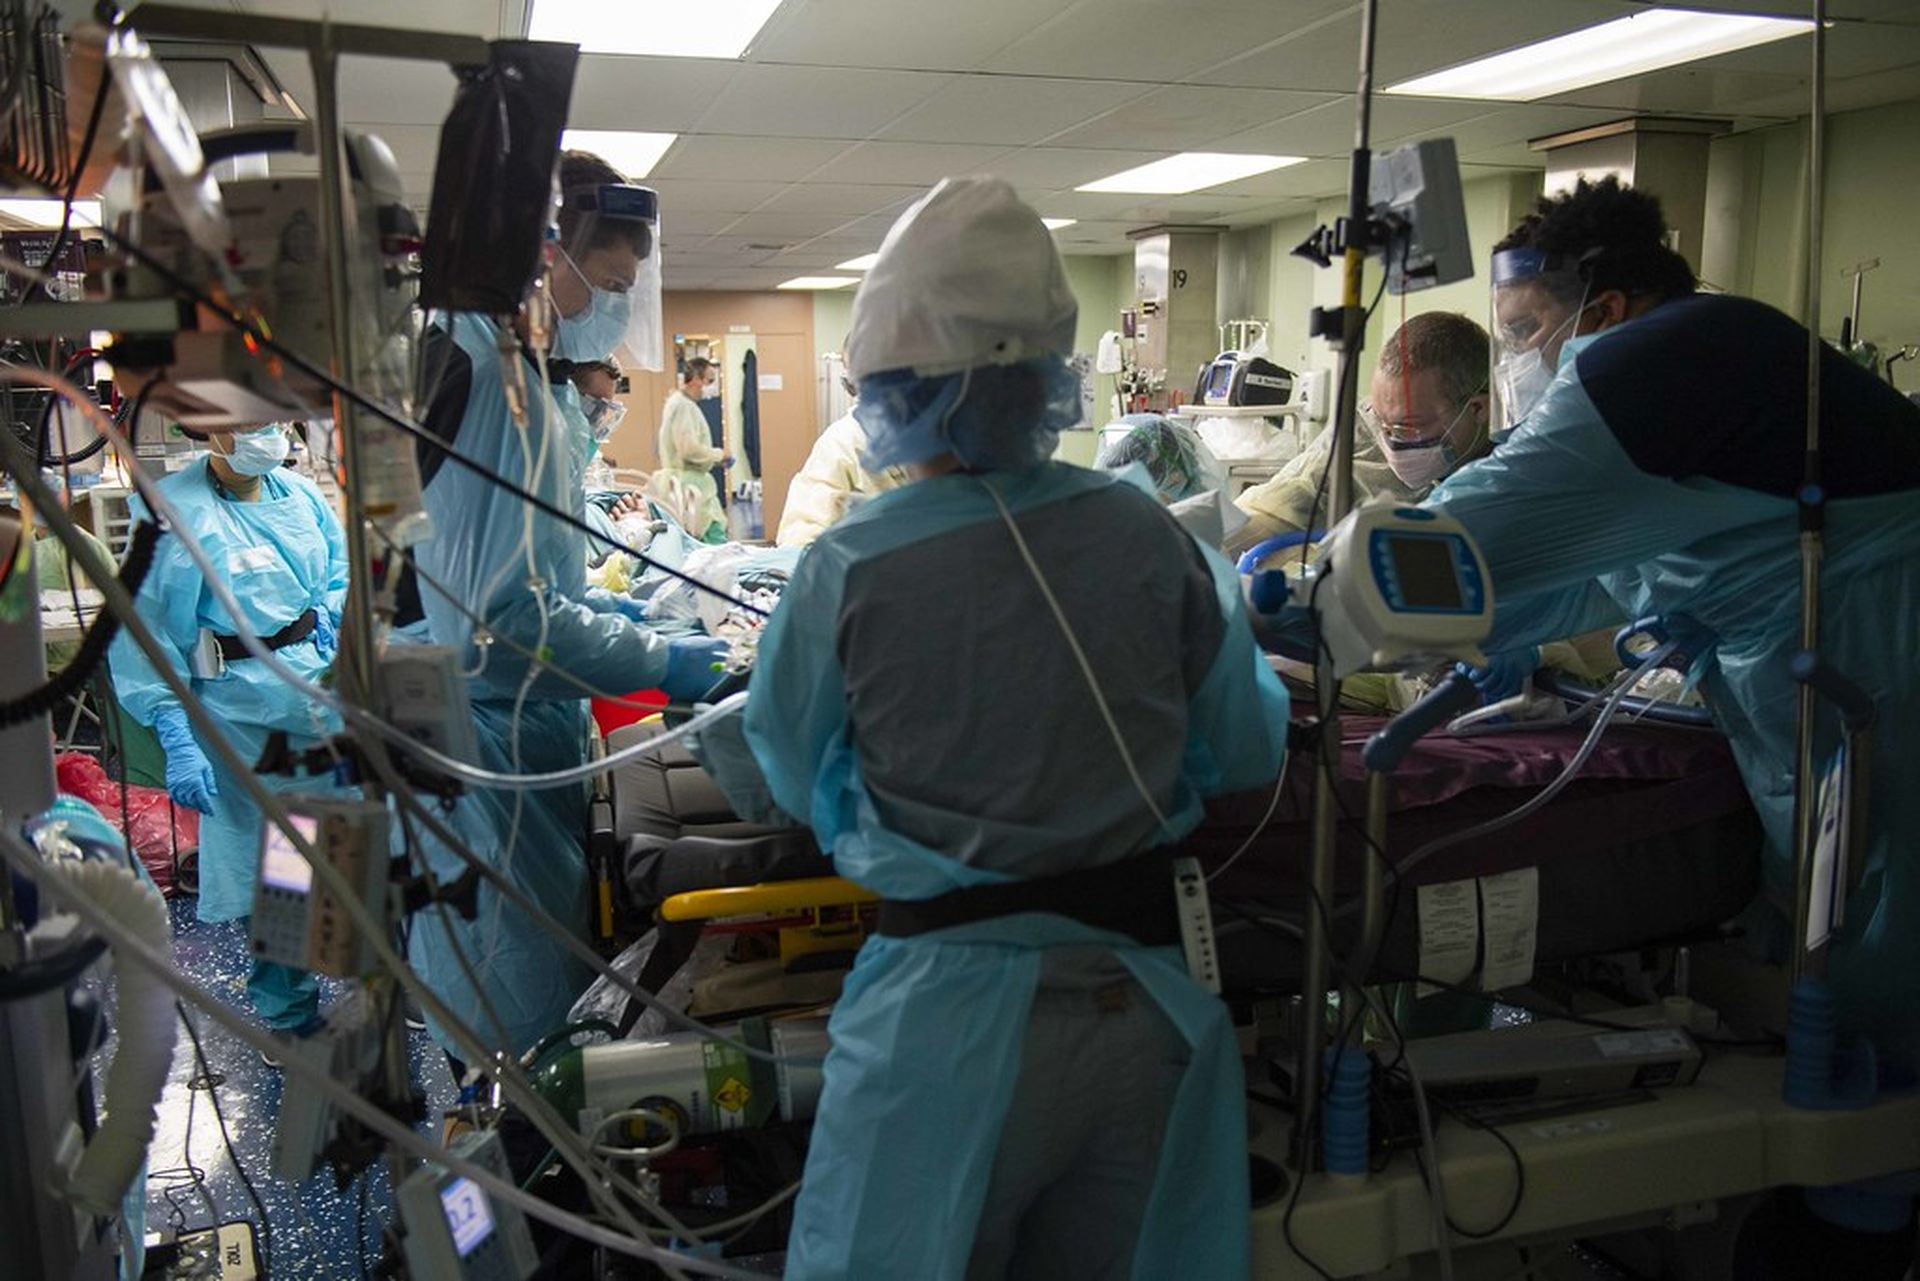 Healthcare stakeholders are expressing support for the proposed move to team HHS with CISA, but worry more needs to be done to support small providers with limited resources. (Photo credit: &#8220;U.S. Navy Doctors, Nurses and Corpsmen Treat COVID Patients in the ICU Aboard USNS Comfort&#8221; by NavyMedicine is marked with CC PDM 1.0.)